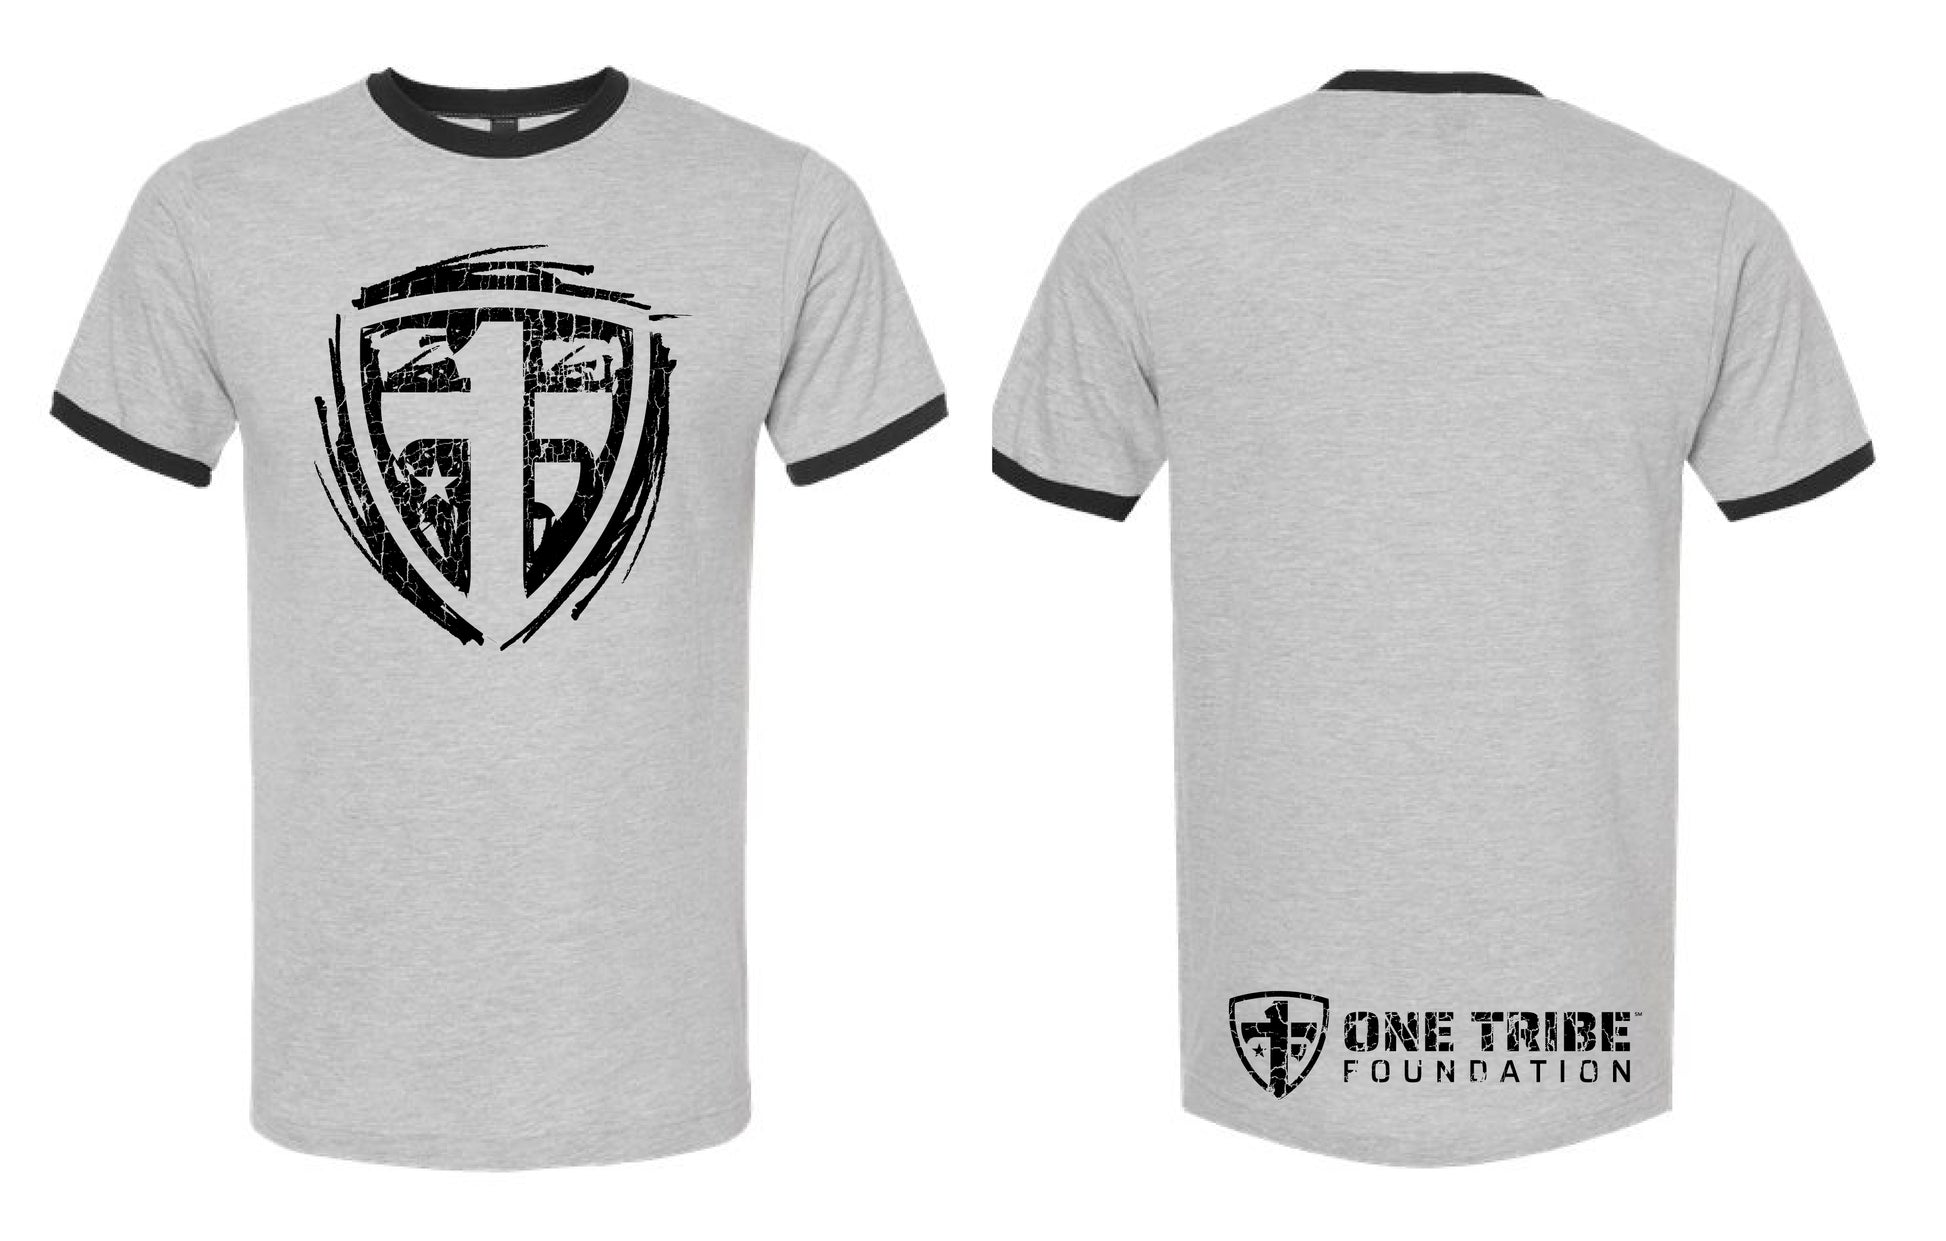 One Tribe Foundation gray and black ringer t-shirt